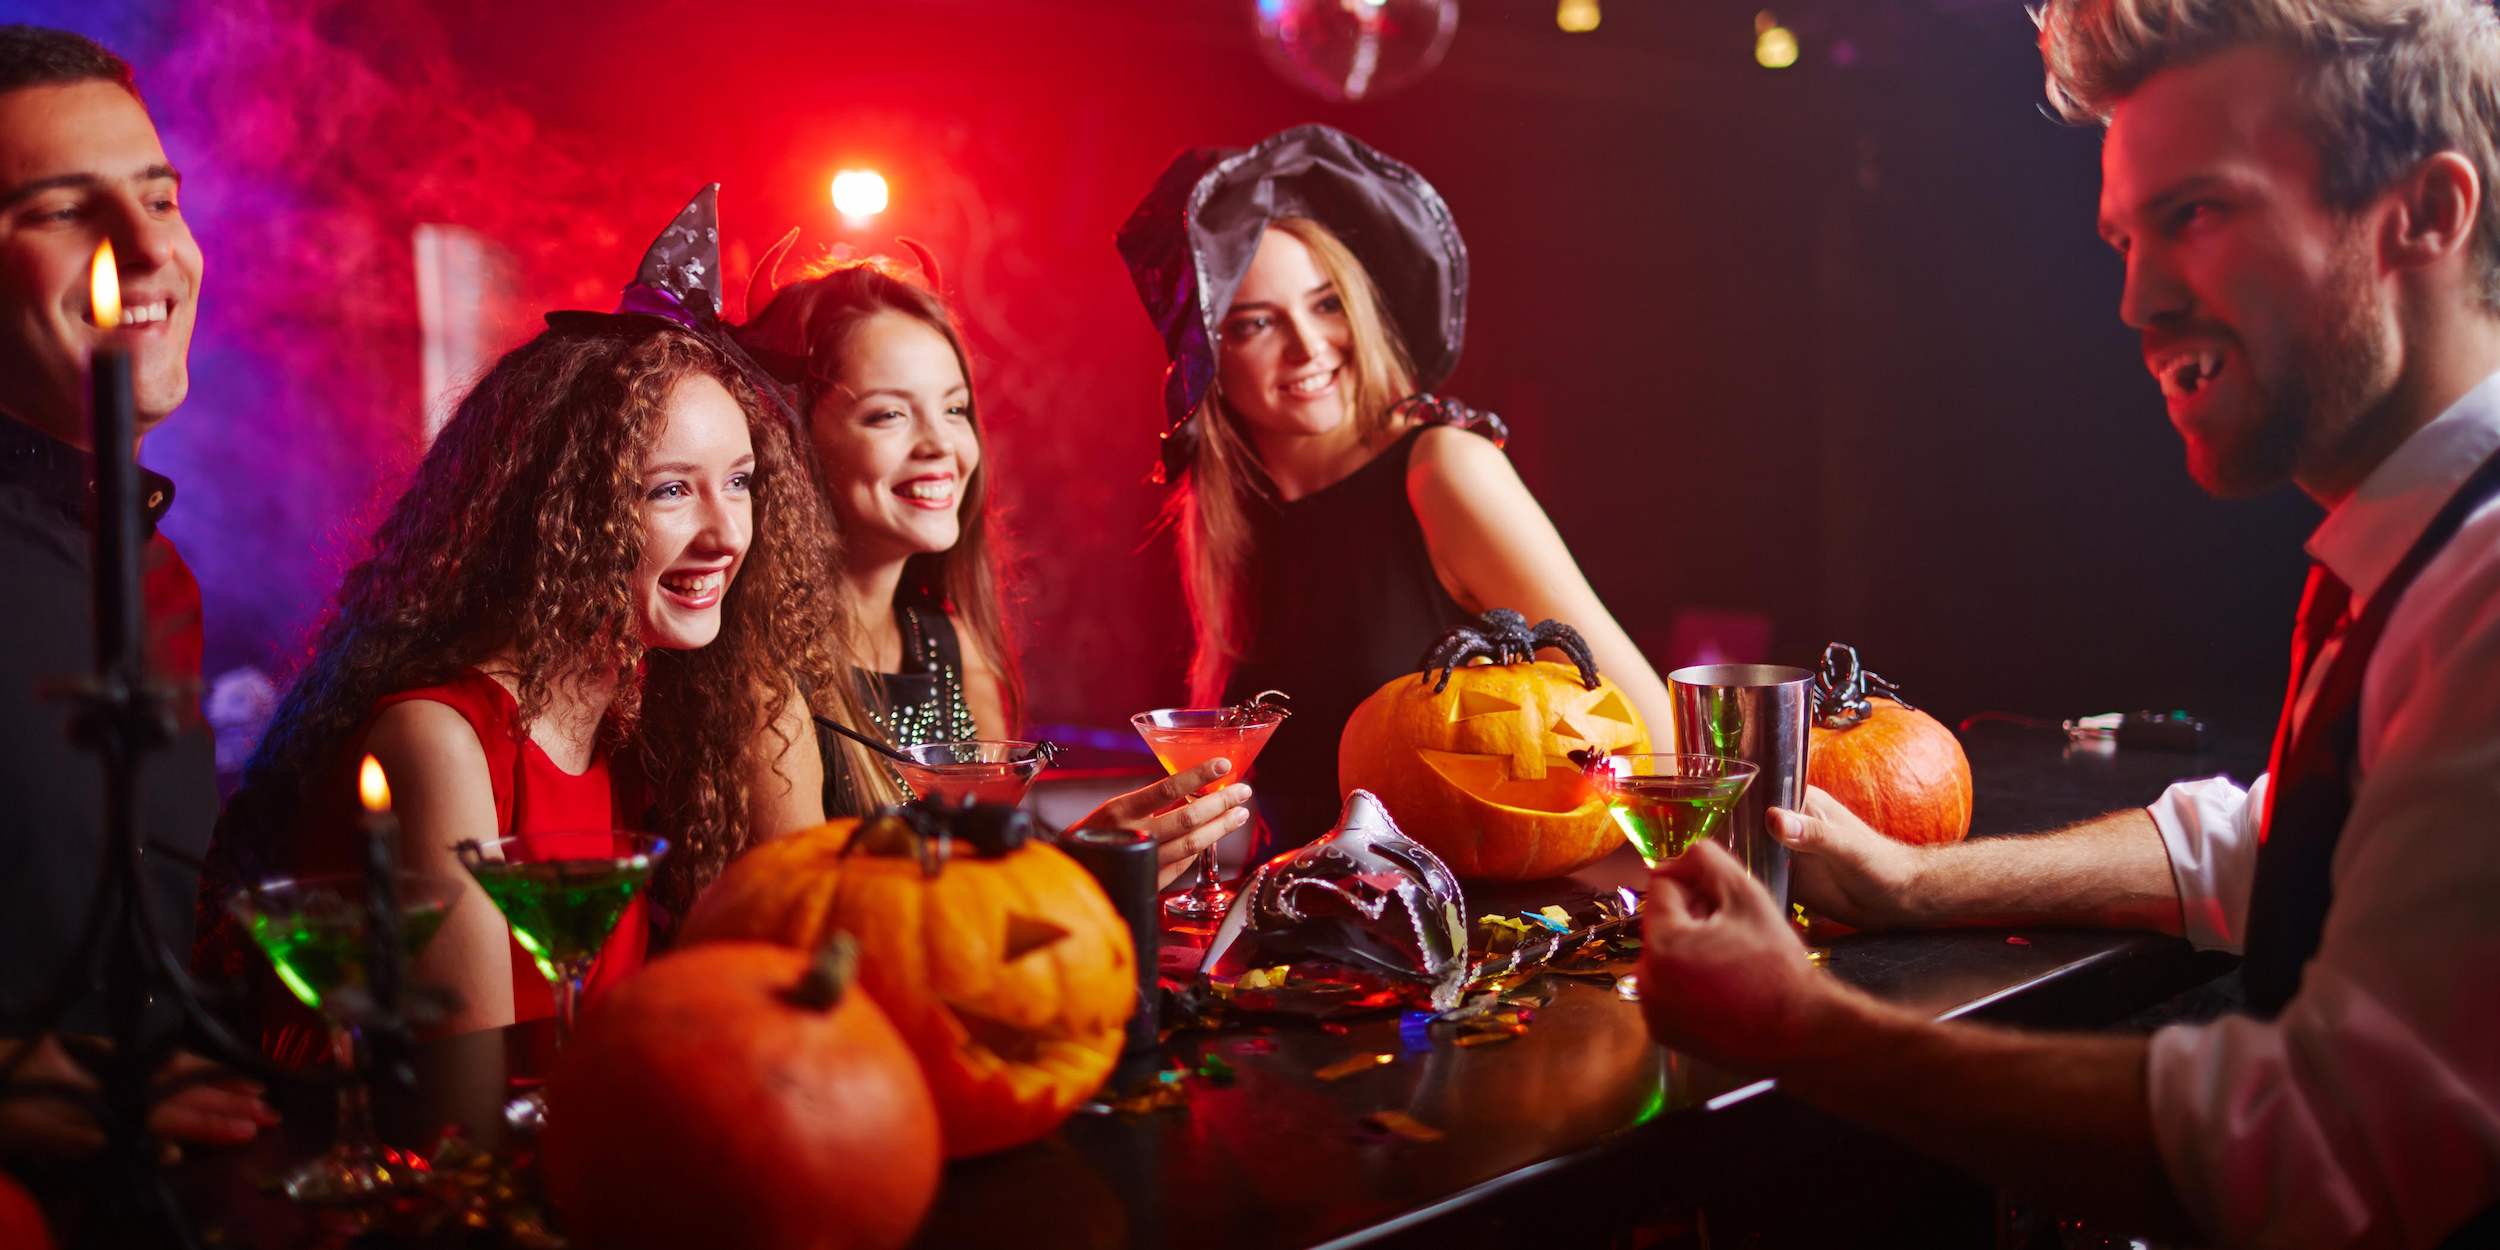 Guests dressed in Halloween costumes at a Halloween-themed bar